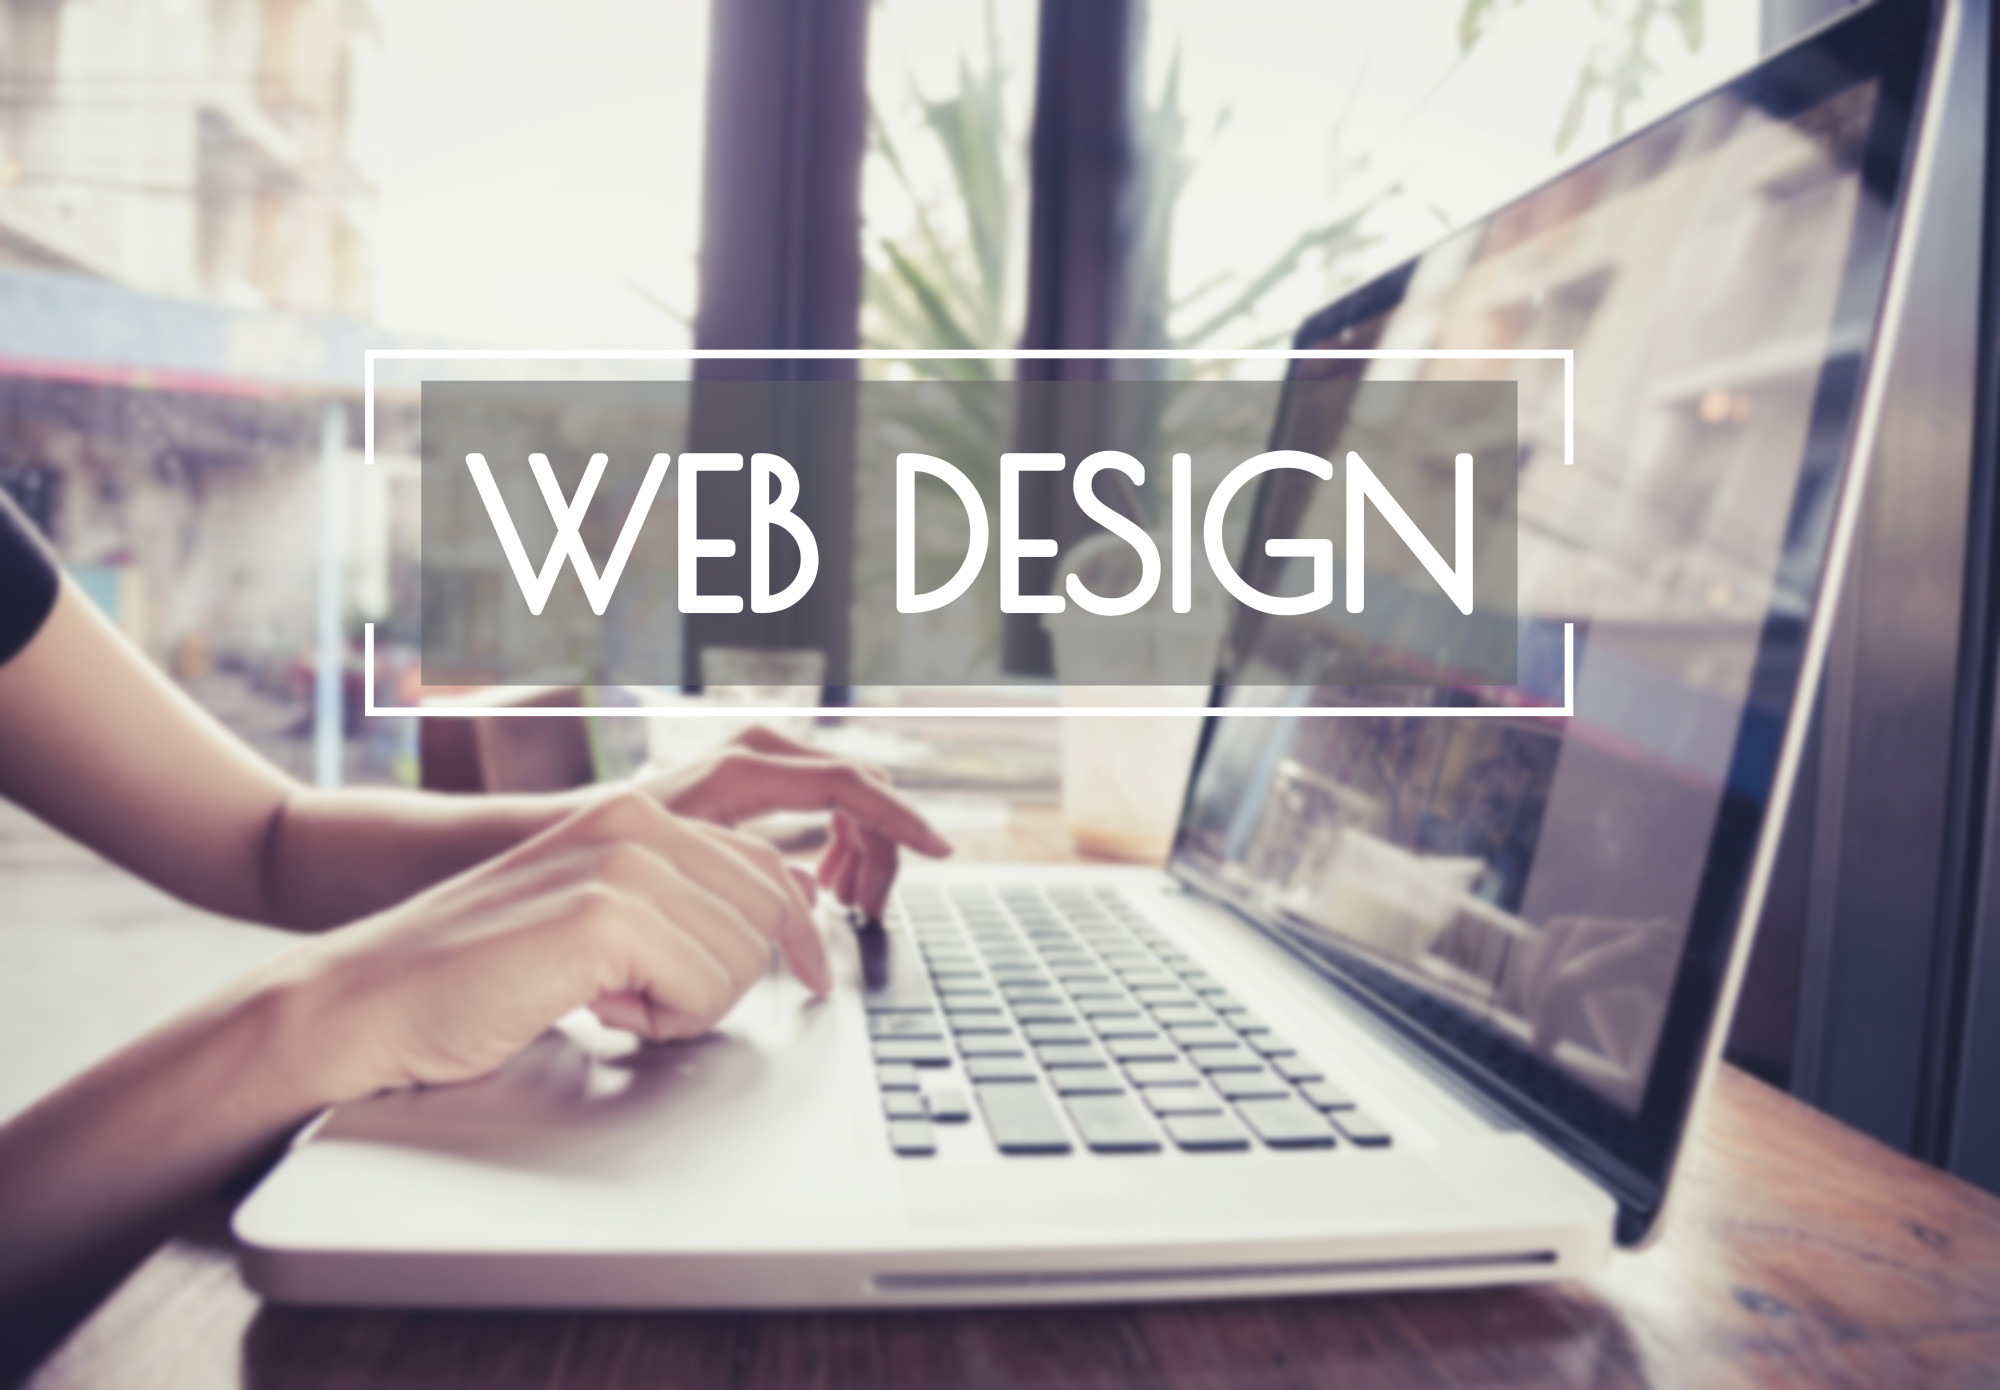 Tips to design your website in an intuitive and engaging way